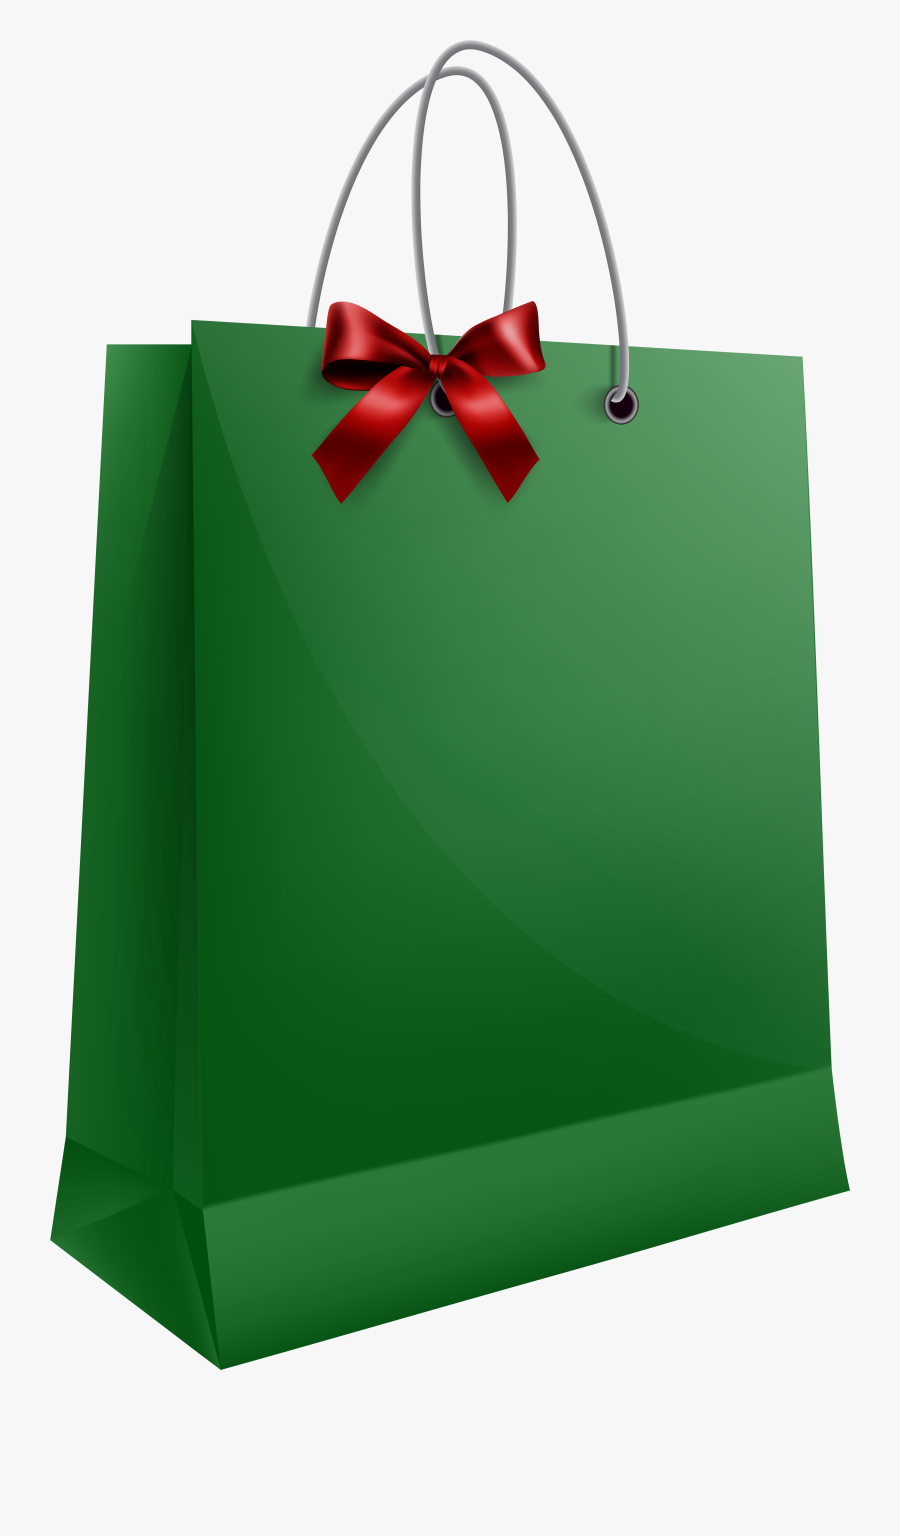 Green Gift Bag With Bow Png Clip Art Image - Christmas Gift Bag Png, Transparent Clipart